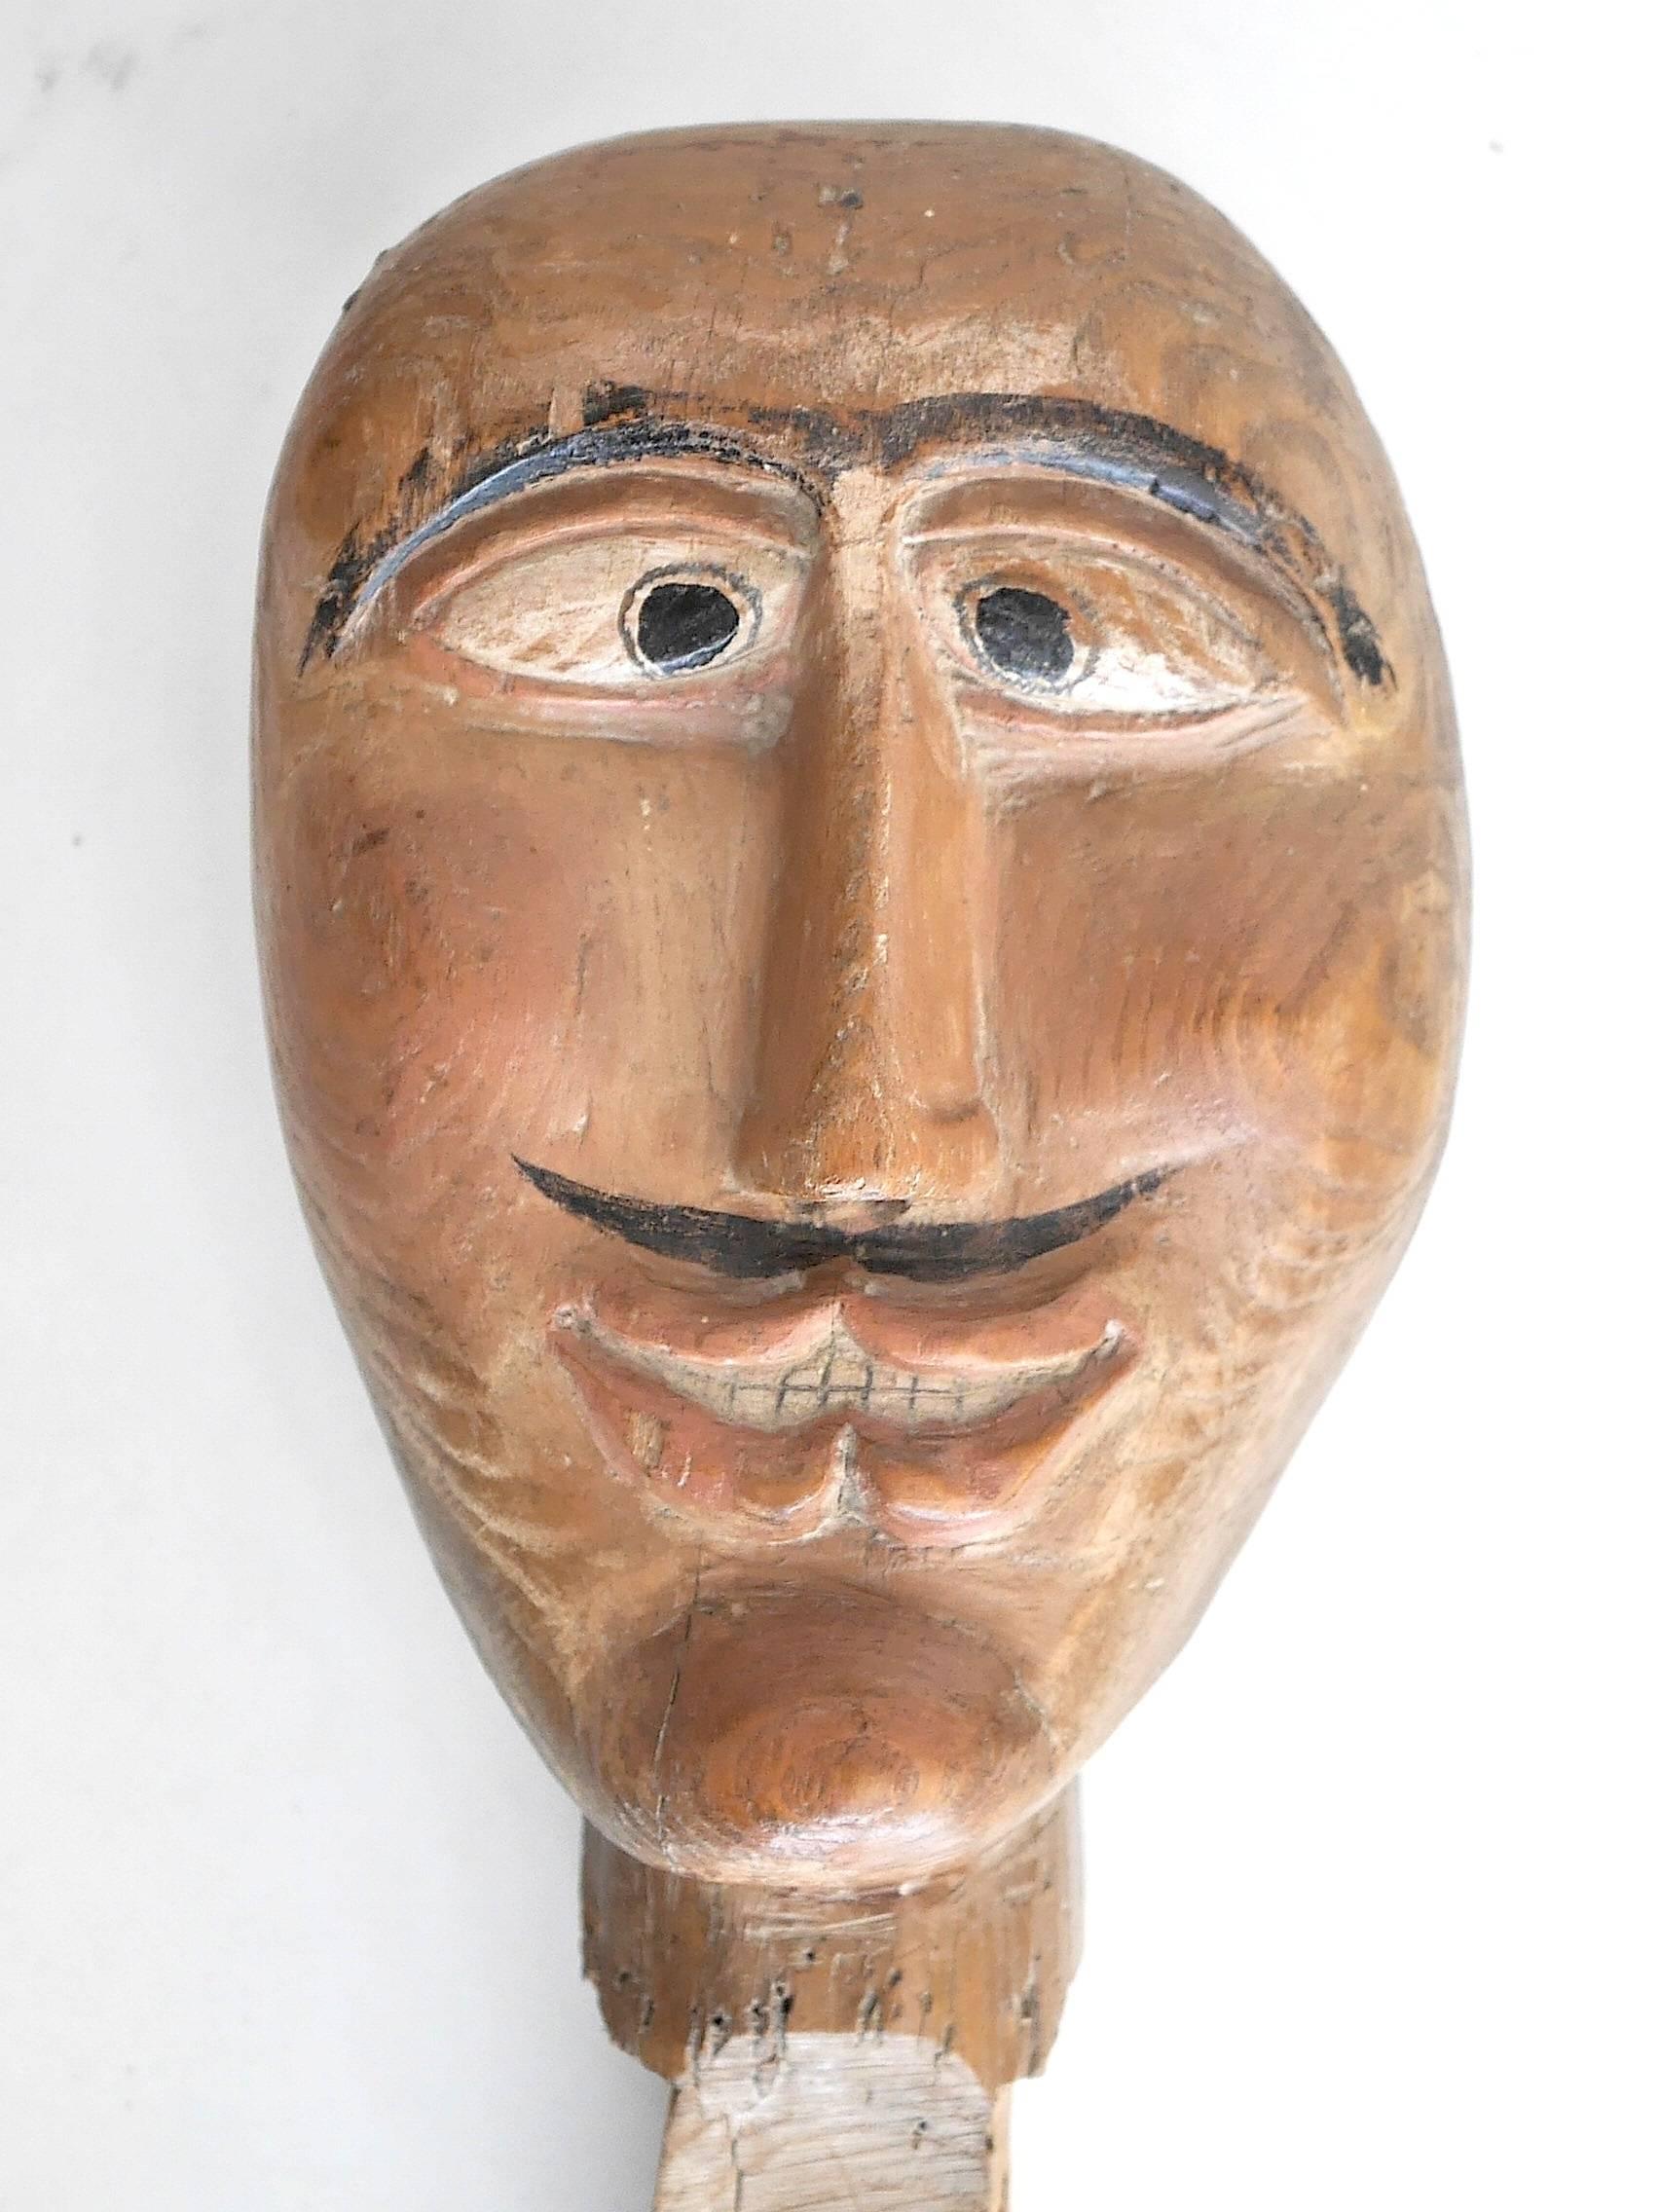 Rare Folk Art item.
That type of wooden heads were used in fairs as targets for small ball shooting games.
 